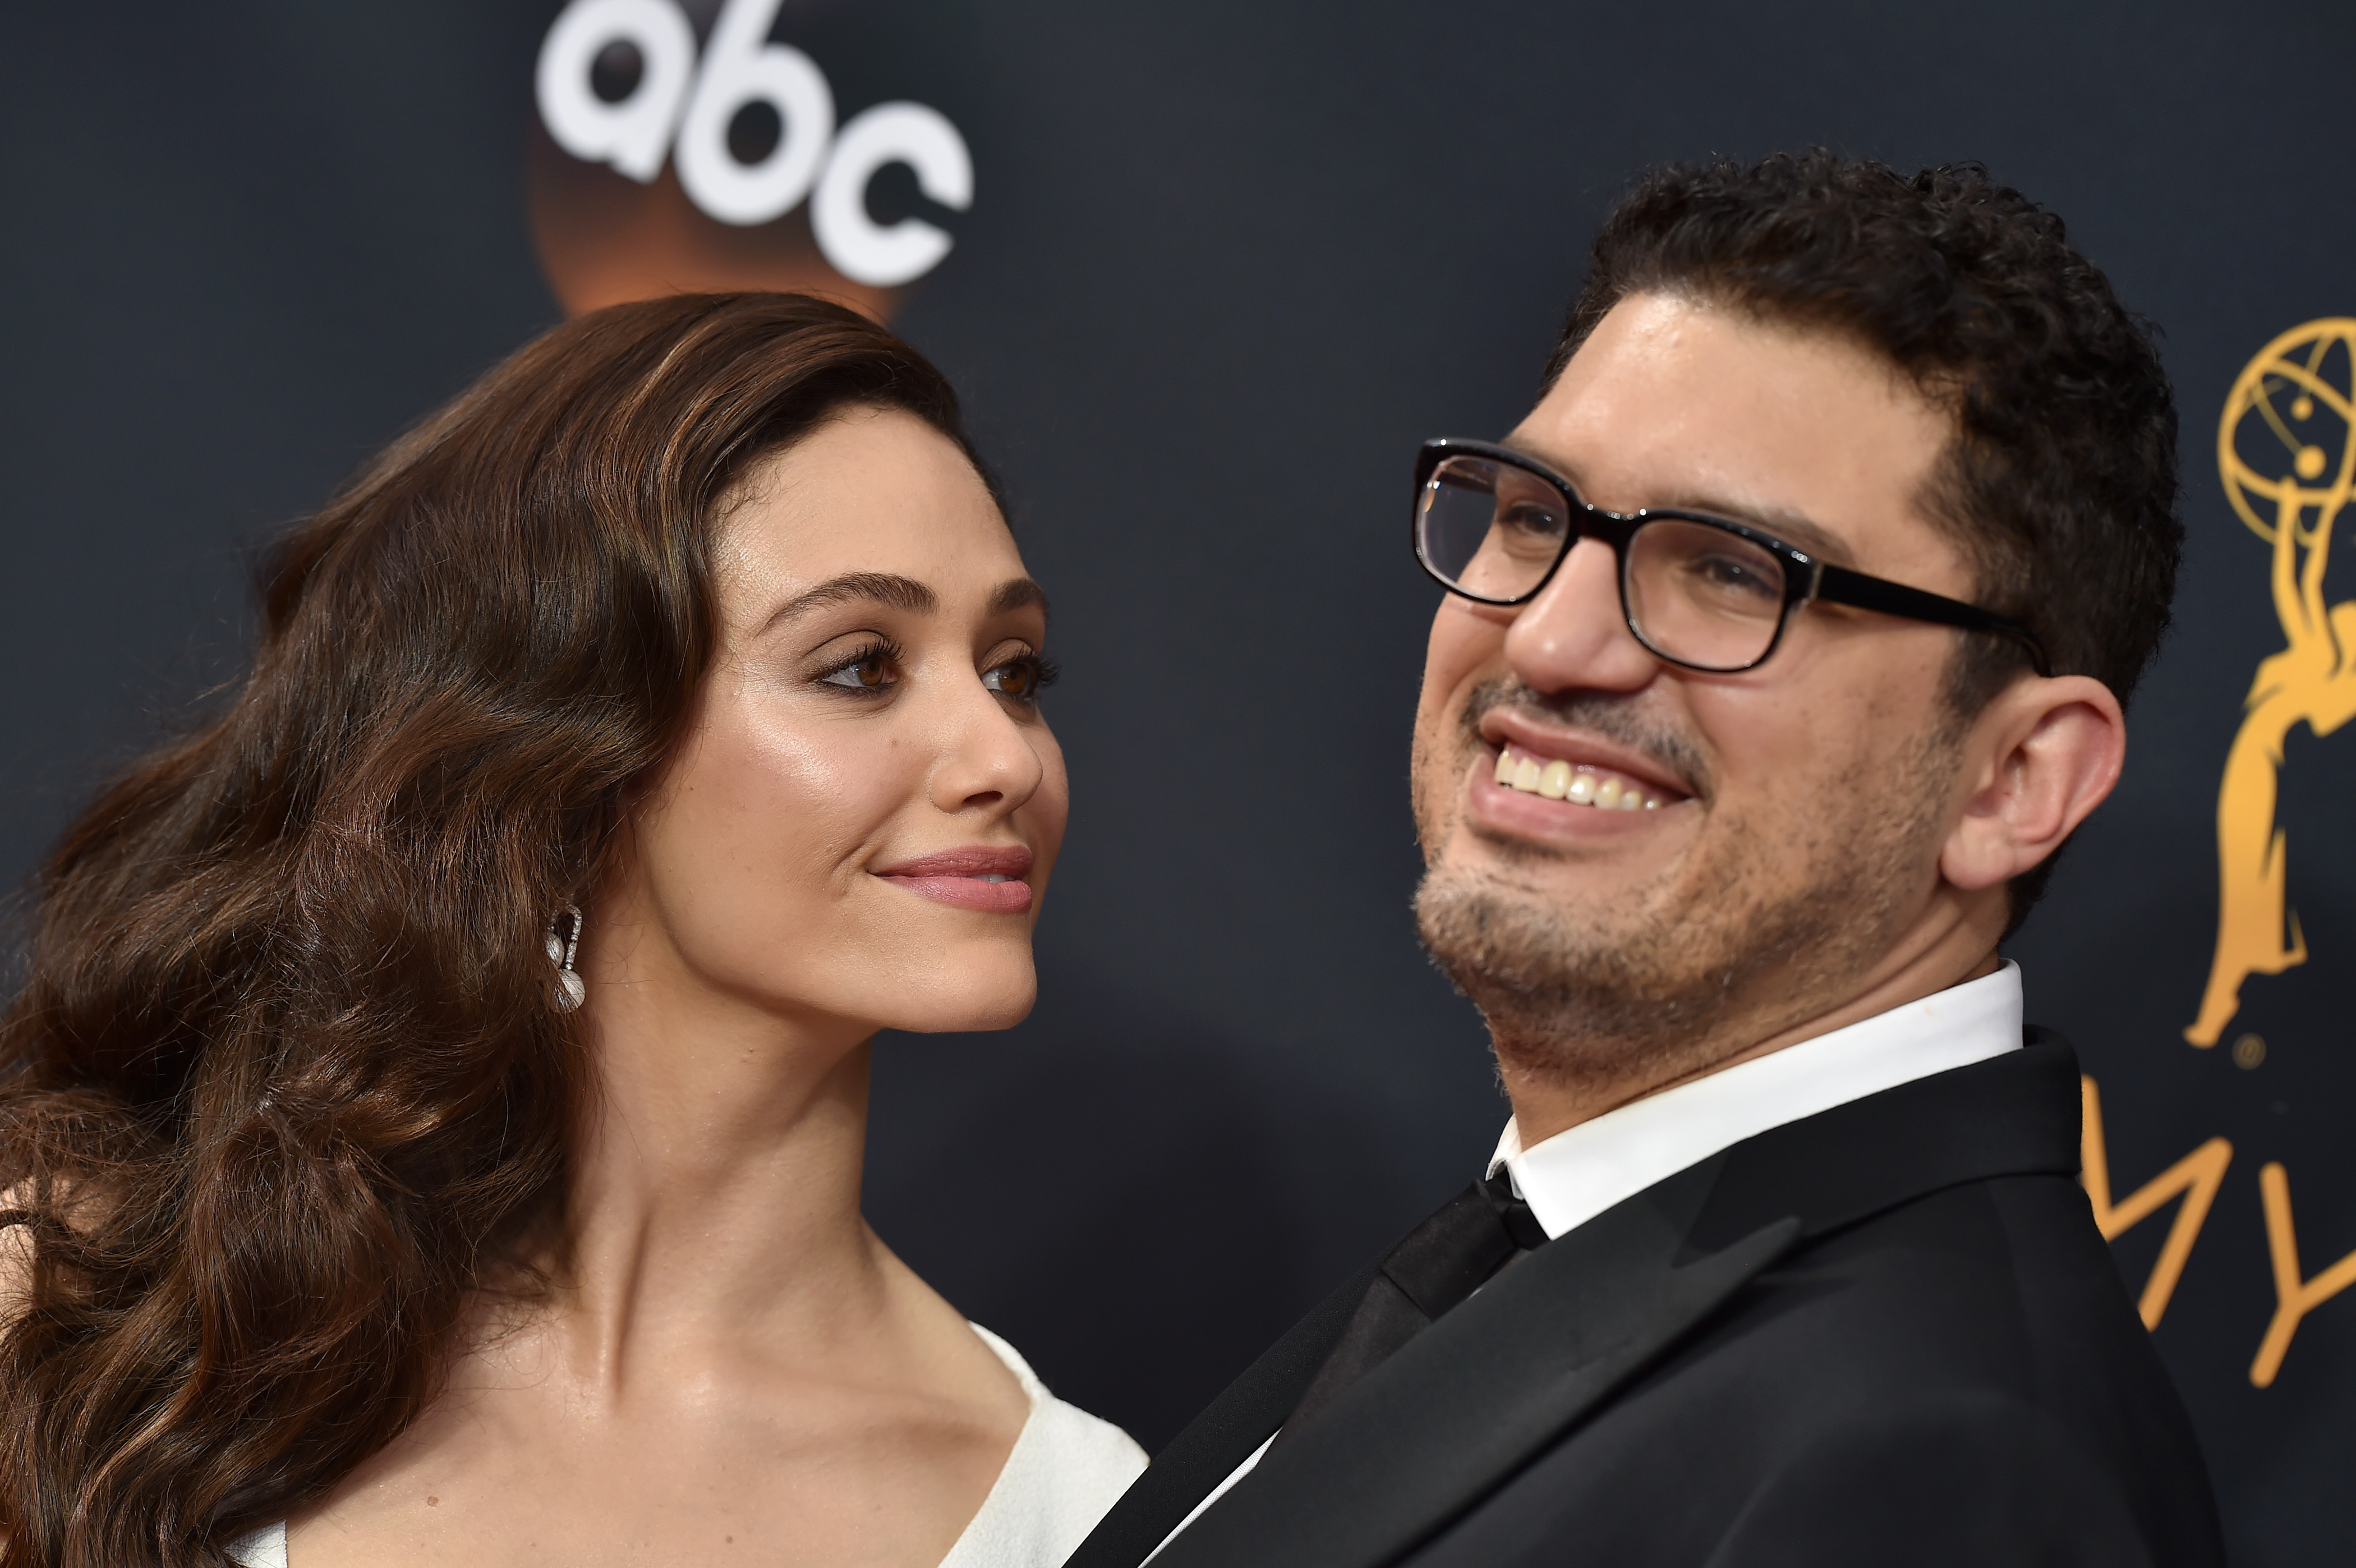 Actress Emmy Rossum (L) and writer/producer Sam Esmail arrive at the 68th Annual Primetime Emmy Awards at Microsoft Theater on September 18, 2016 in Los Angeles, California. (Axelle/Bauer-Griffin—FilmMagic)